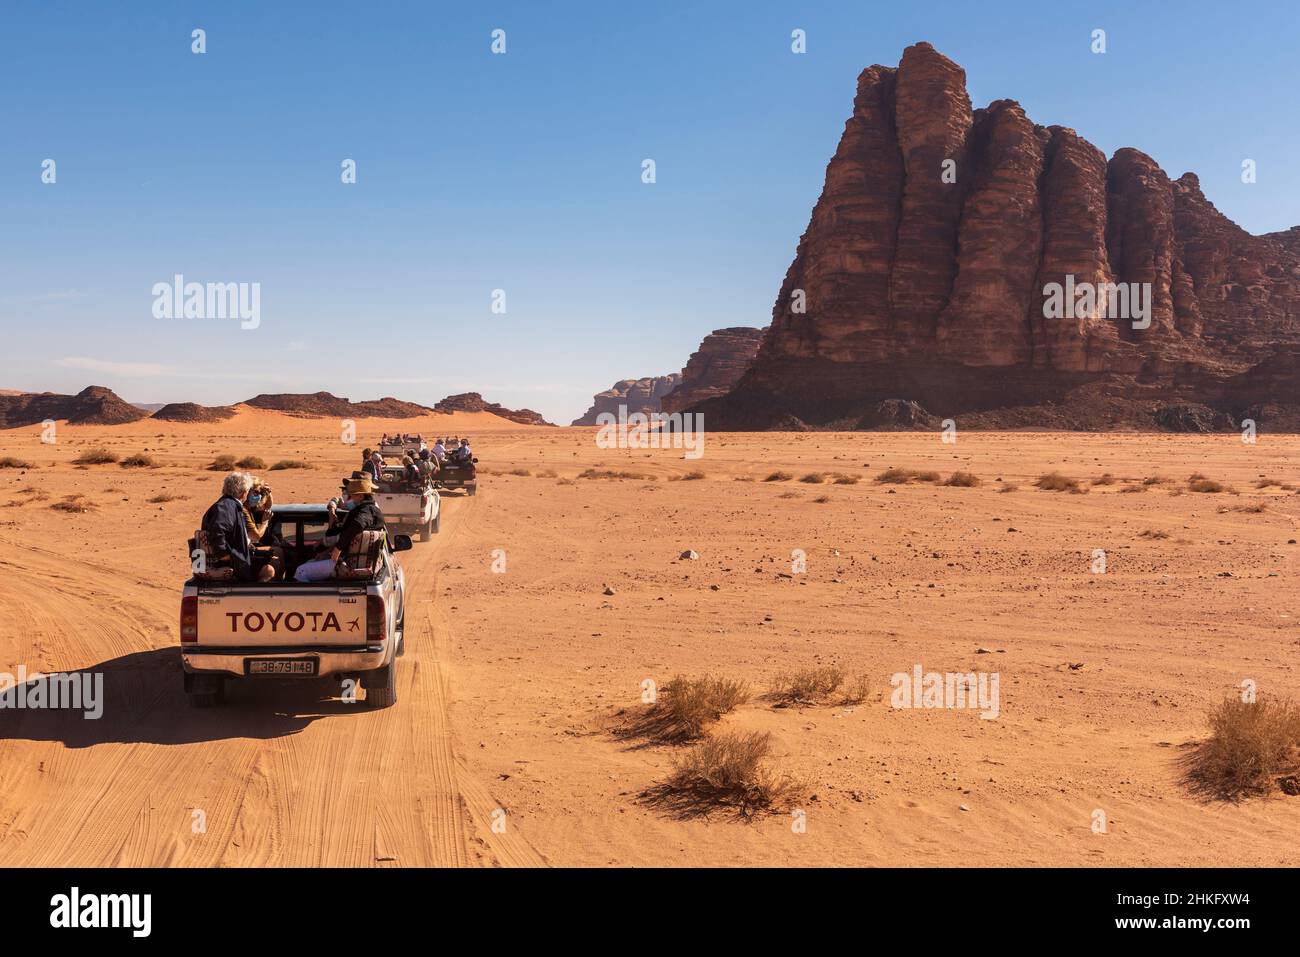 Jordan, Aqaba Governorate, Wadi Rum, listed as World Heritage by UNESCO, desert, Um Ishrin Mountains, the Seven Pillars of Wisdom and tourists in four wheel drive vehicles Stock Photo